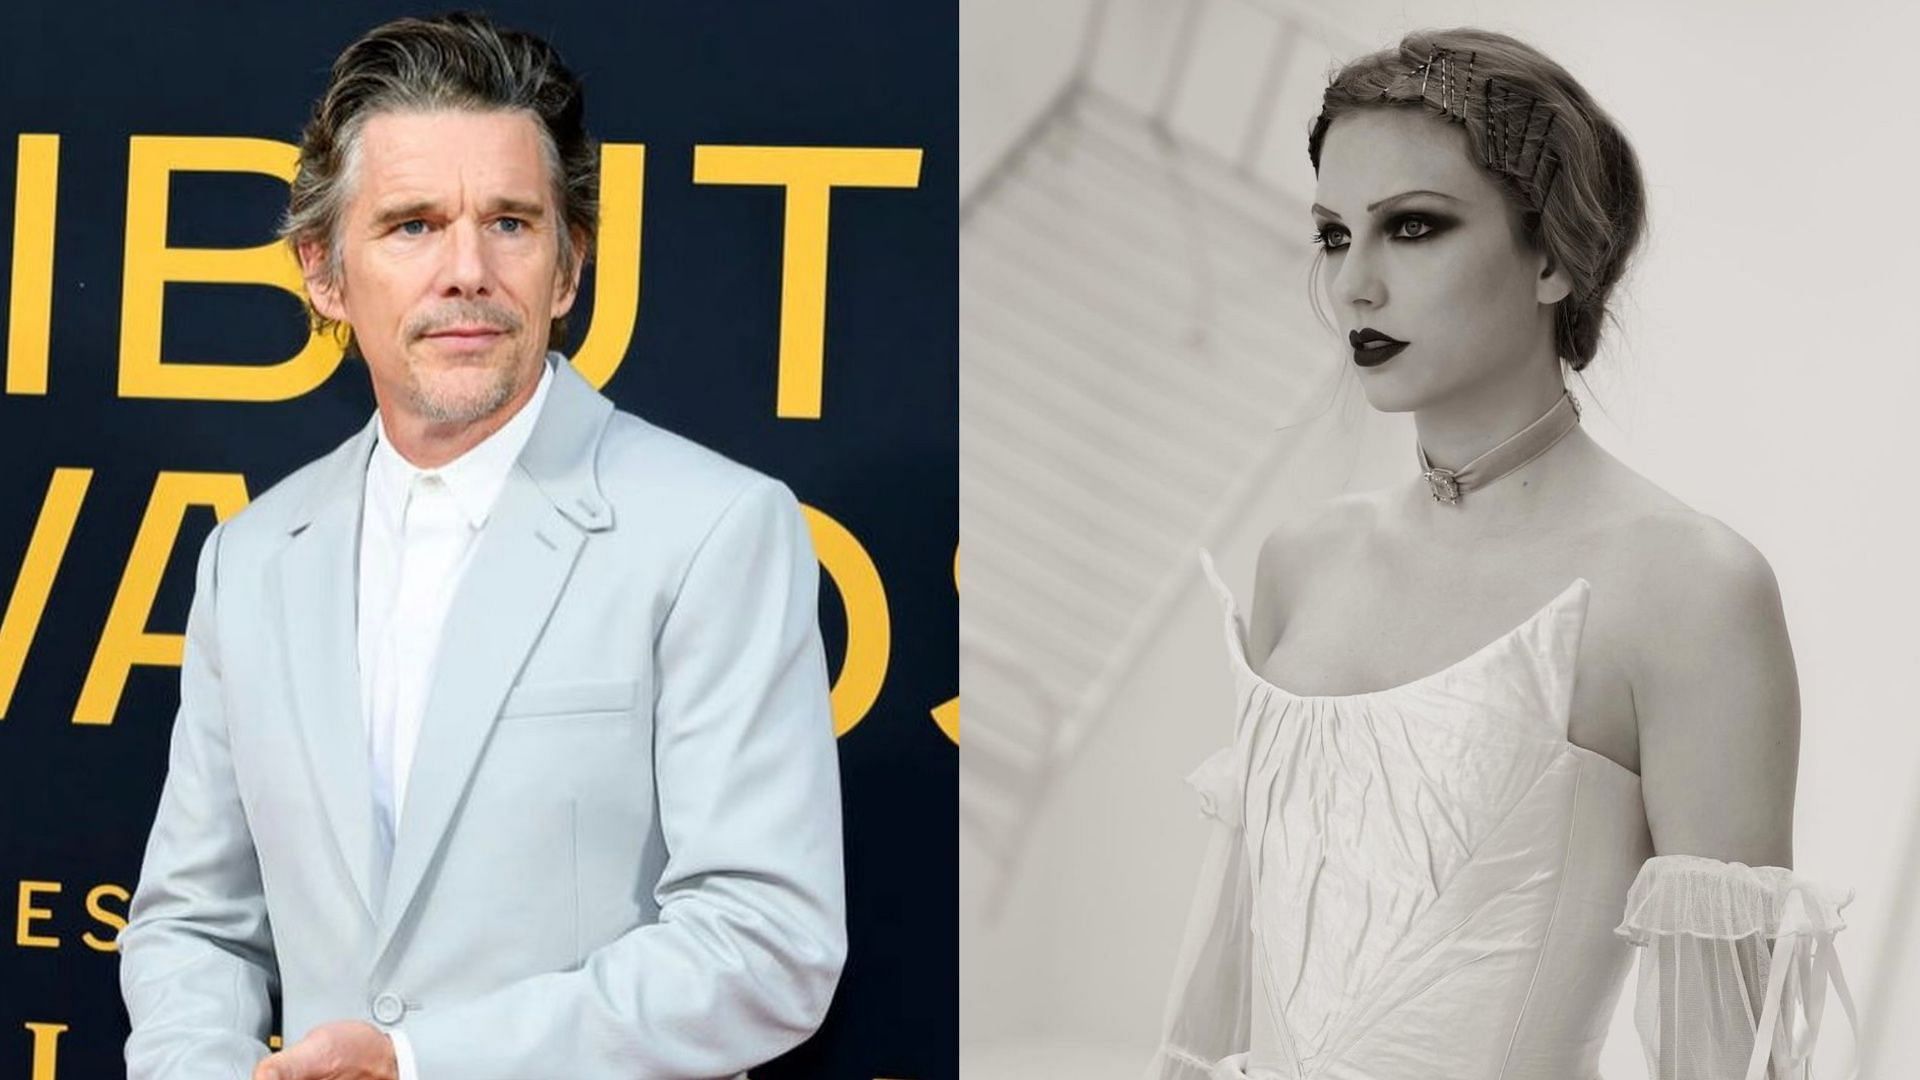 Ethan Hawke opened up about his experience of working with Taylor Swift (Image via Instagram / @ethanhawke and @taylorswift)